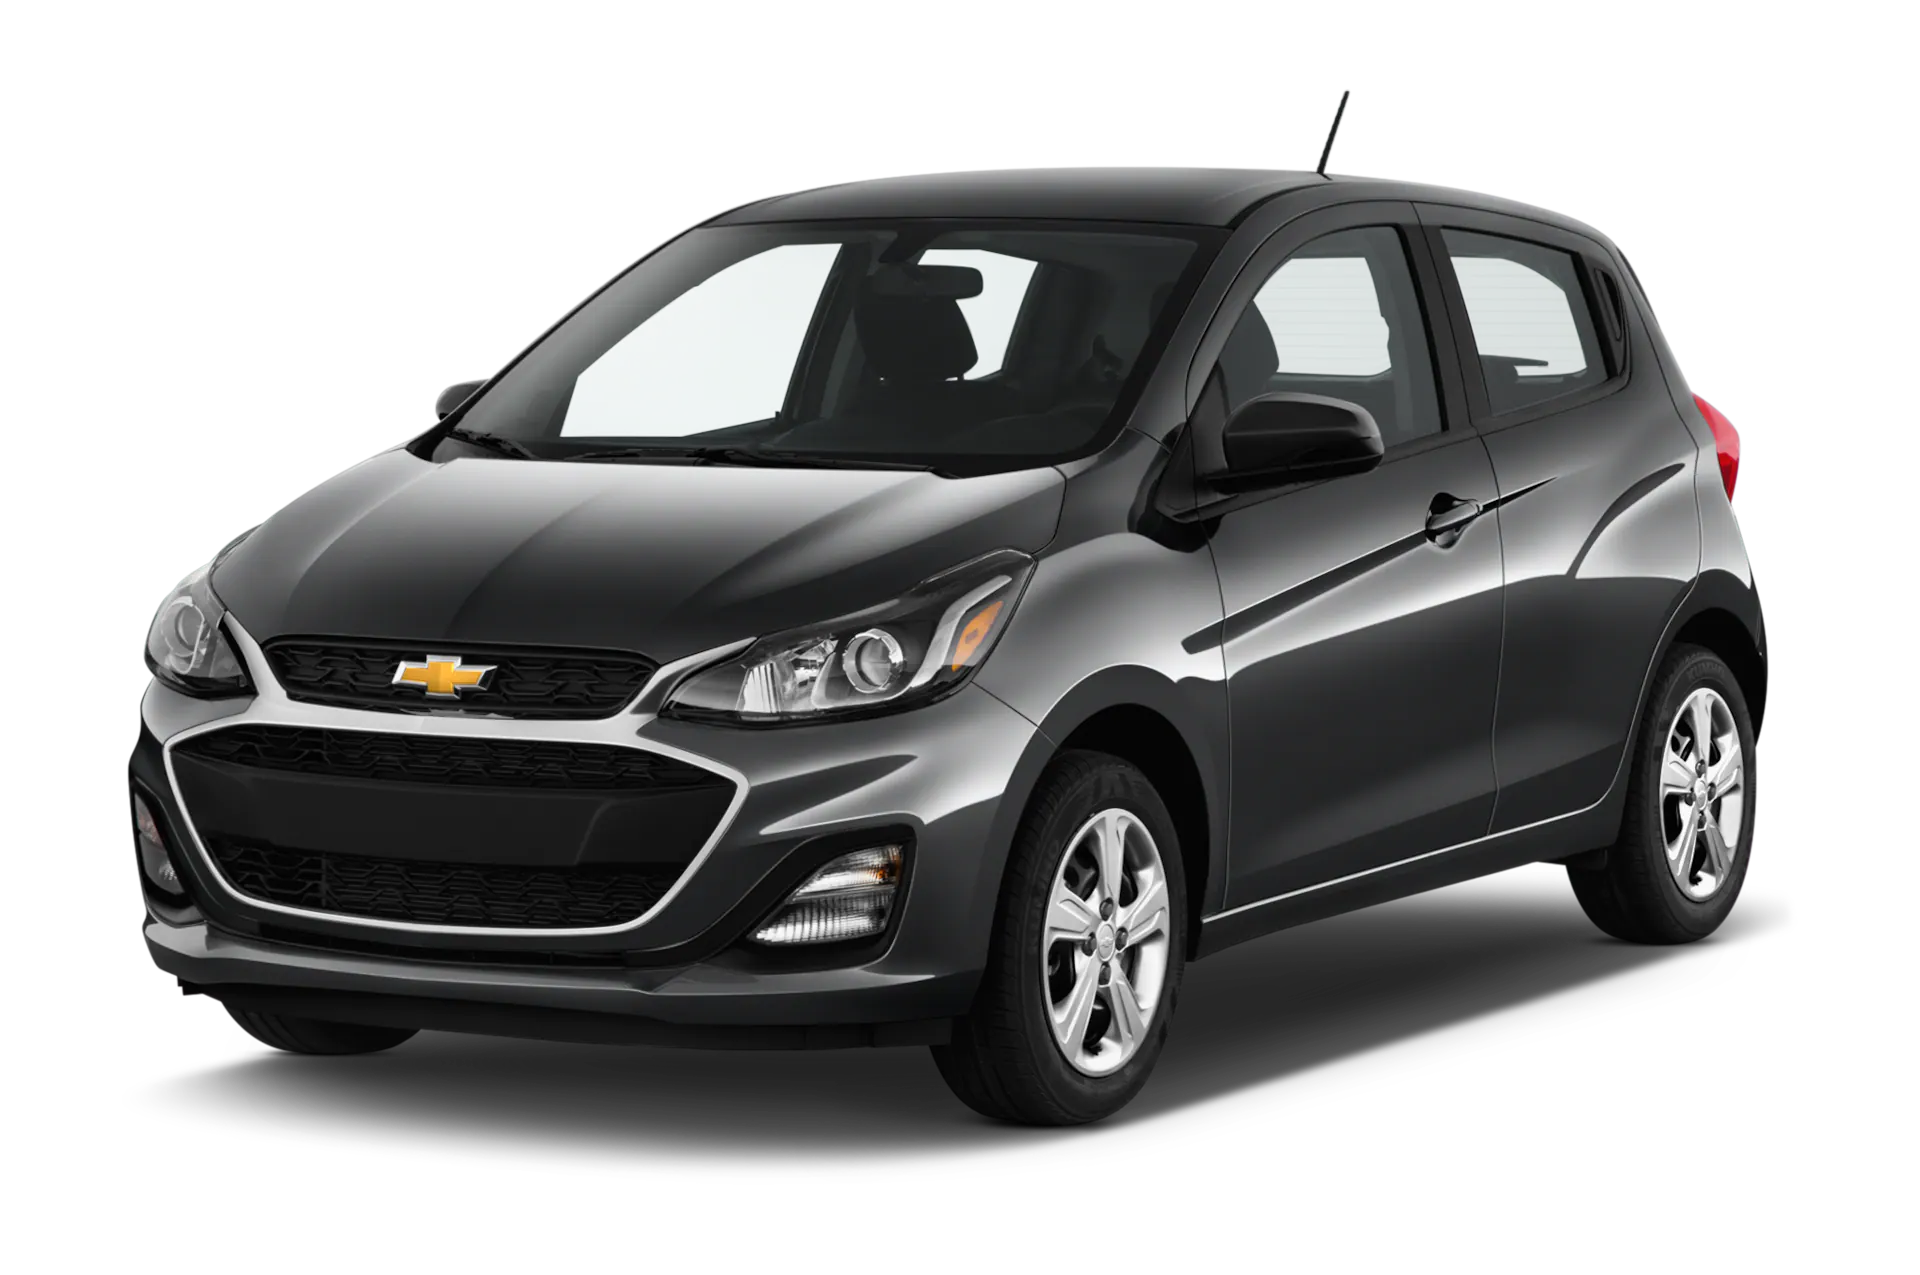 2020-Chevrolet-Spark-featured-image